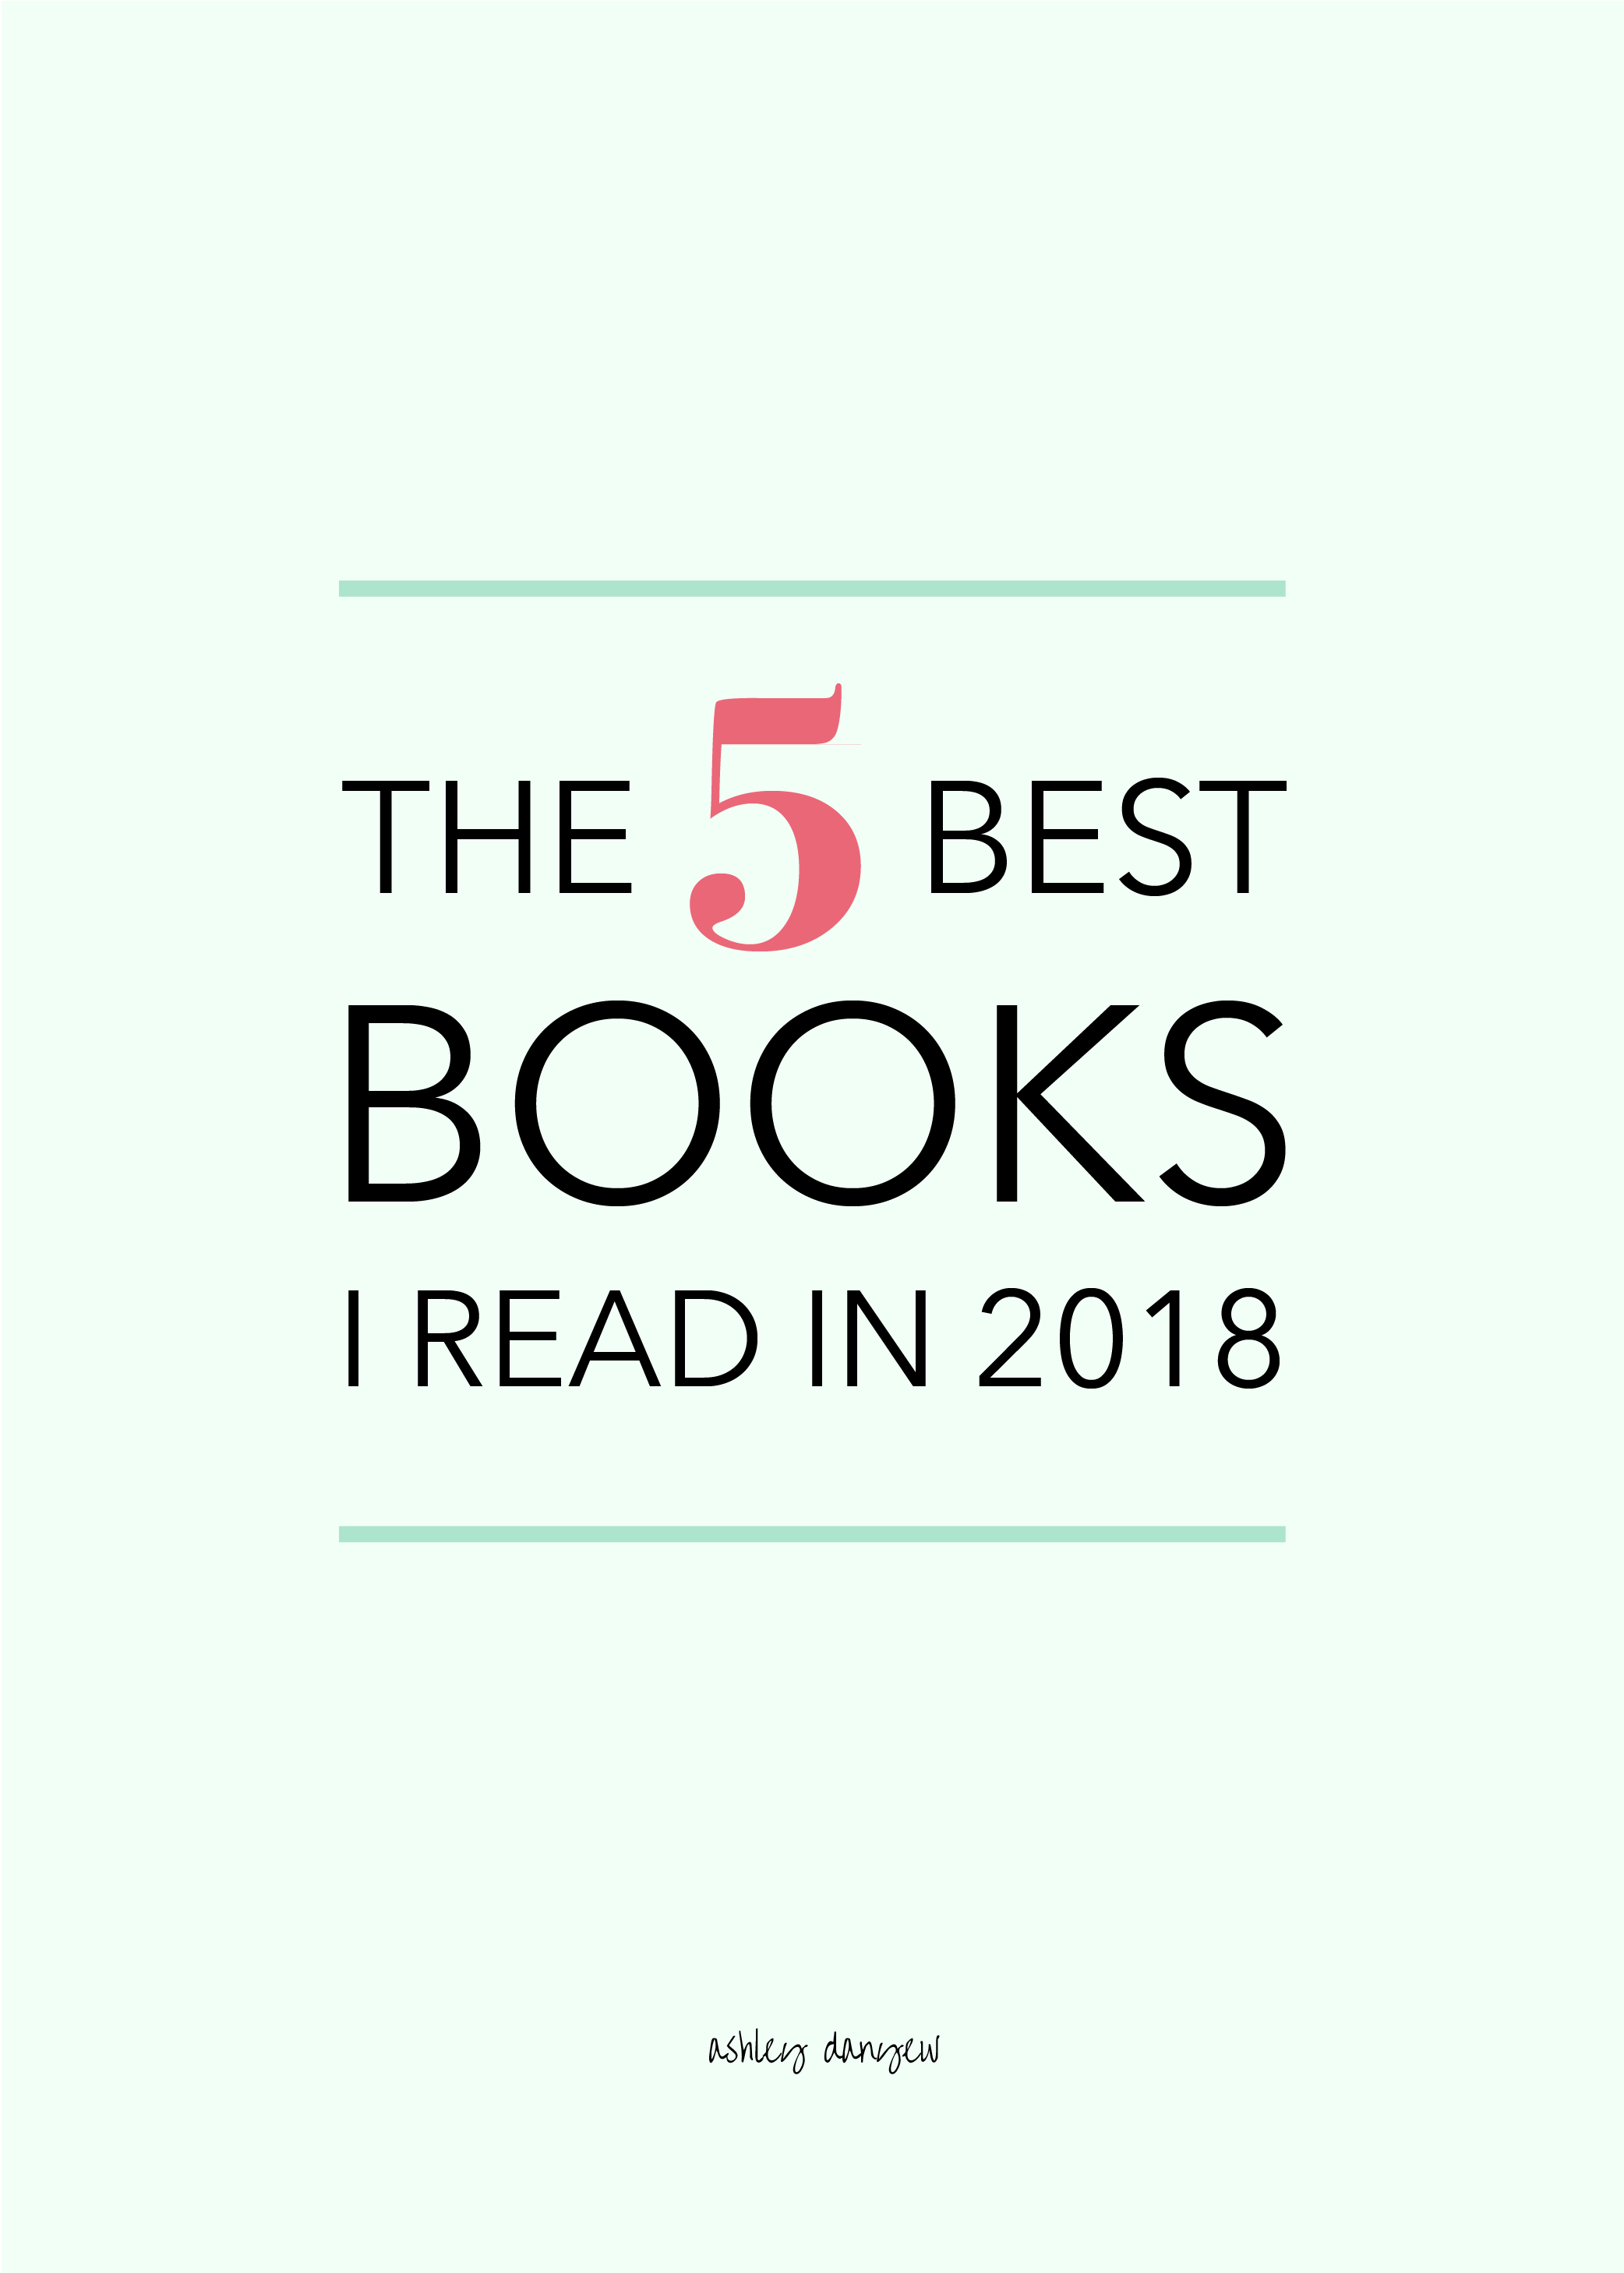 The 5 Best Books I Read in 2018